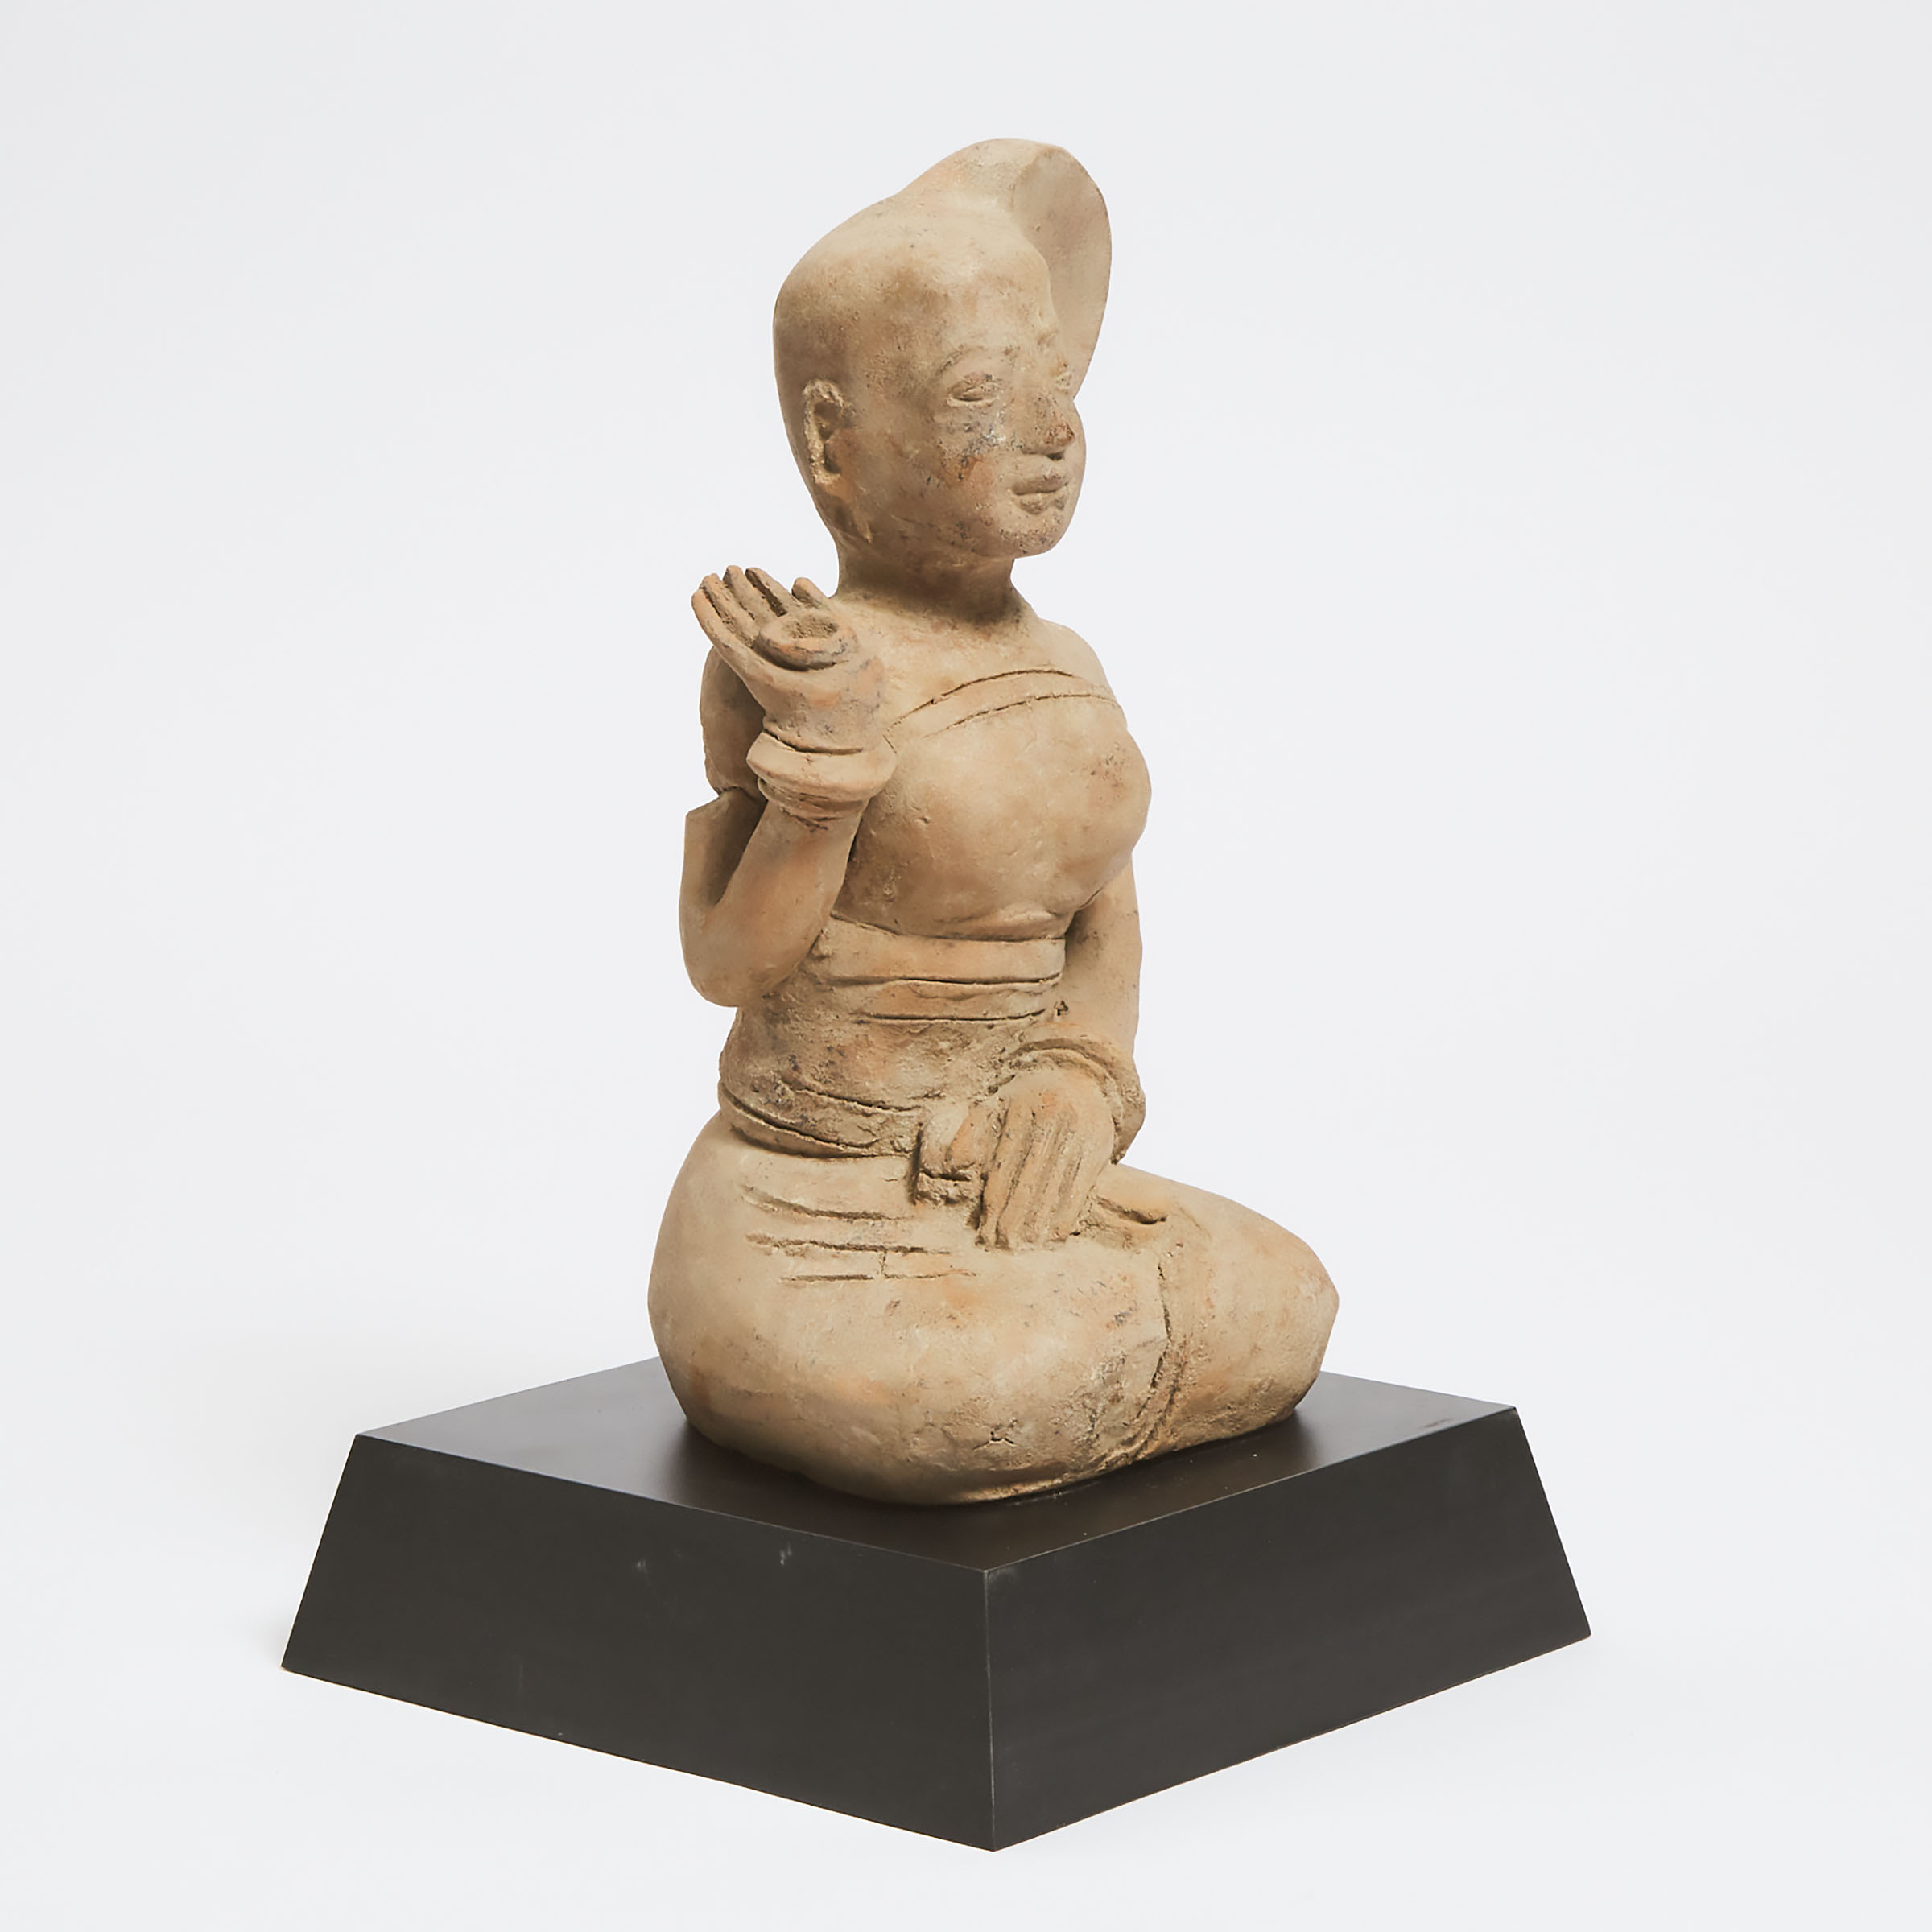 A Terracotta Figure of a Goddess, Majapahit Empire, Java, 14th Century or Later